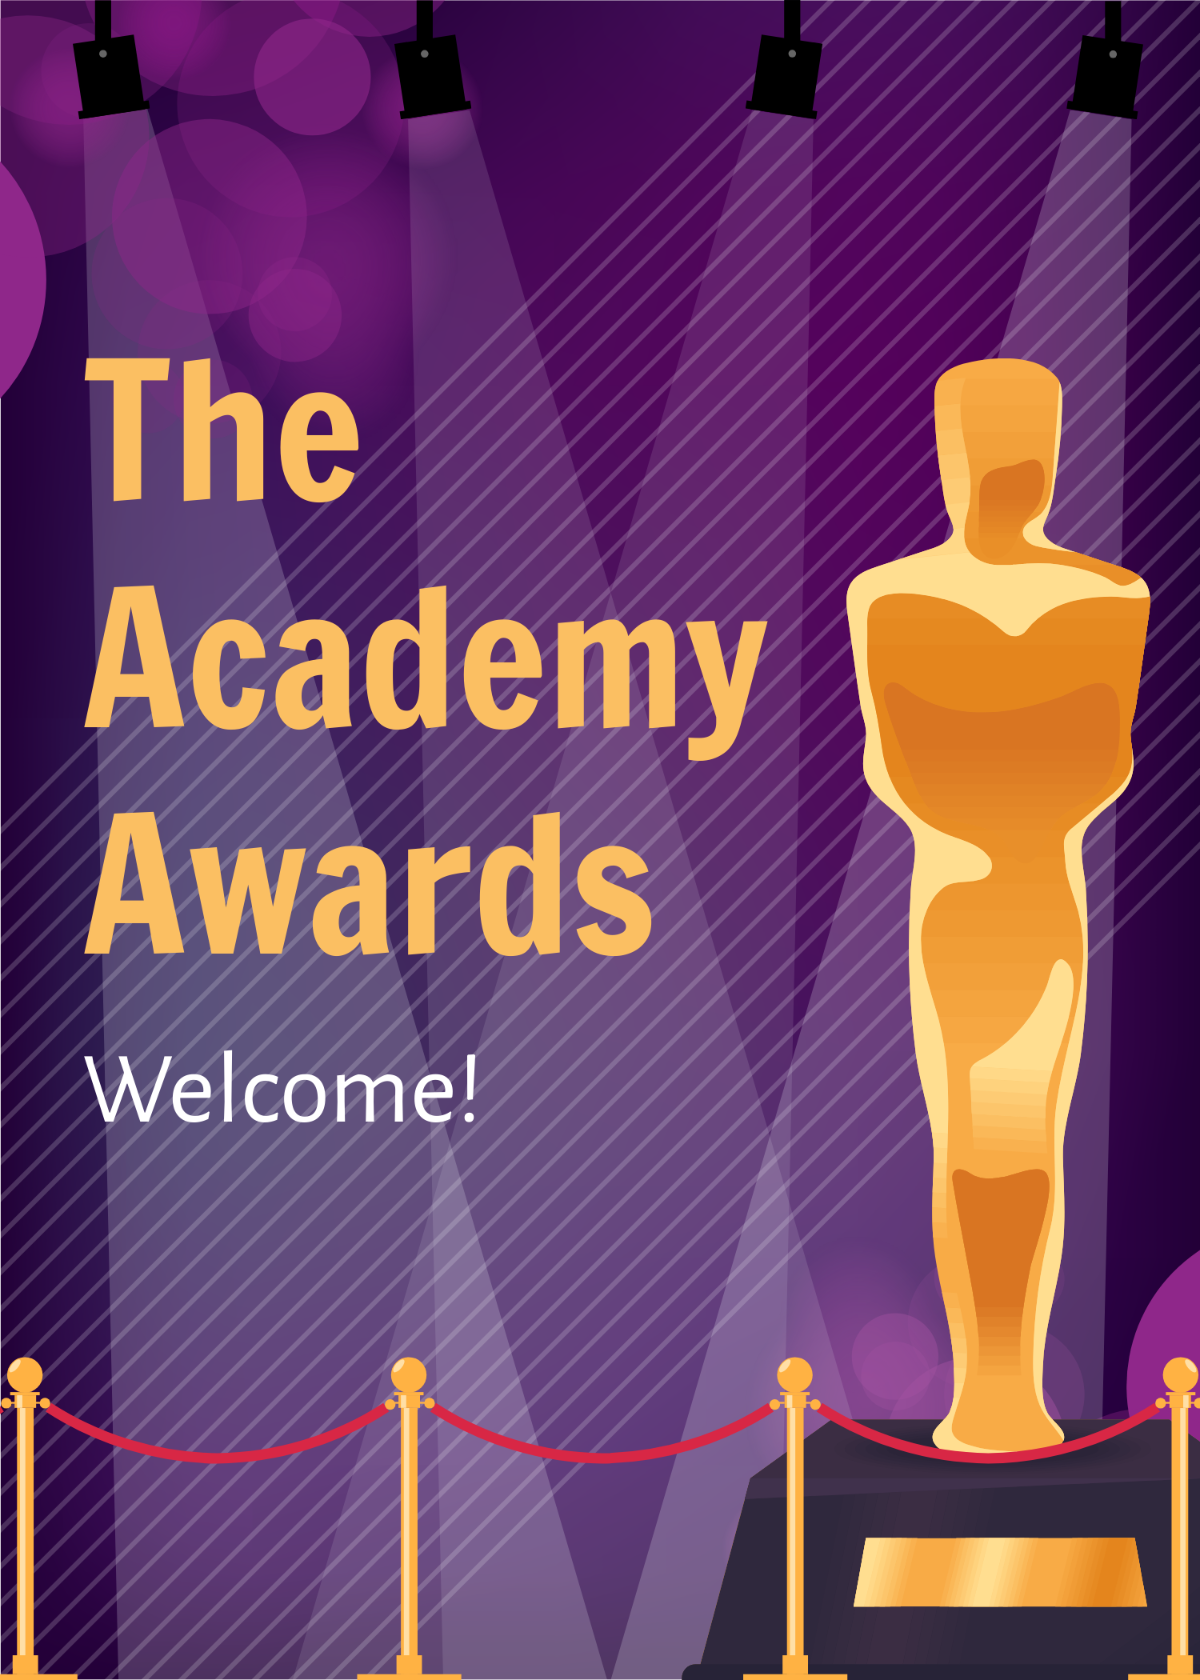 The Academy Awards Greeting Card